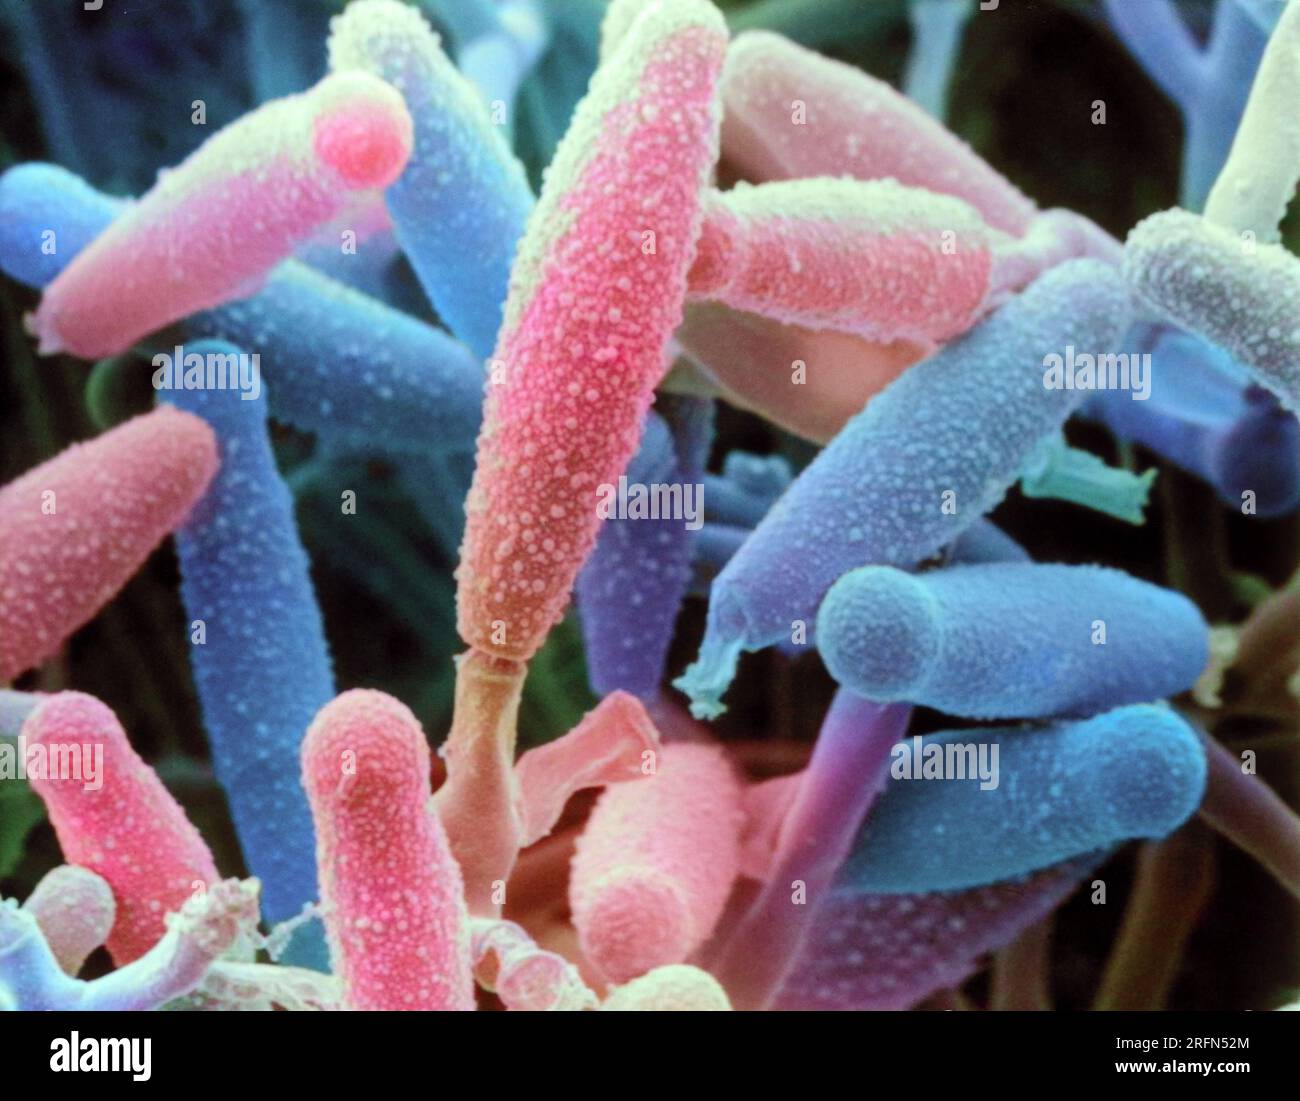 Scanning Electron Micrograph (SEM) of Microsporum gyseum. Microsporum gyseum is a fungus that causes infection of the hands, face, and scalp in humans. Rough walled cigar-shaped macroconidia. Magnification: 1576 Stock Photo